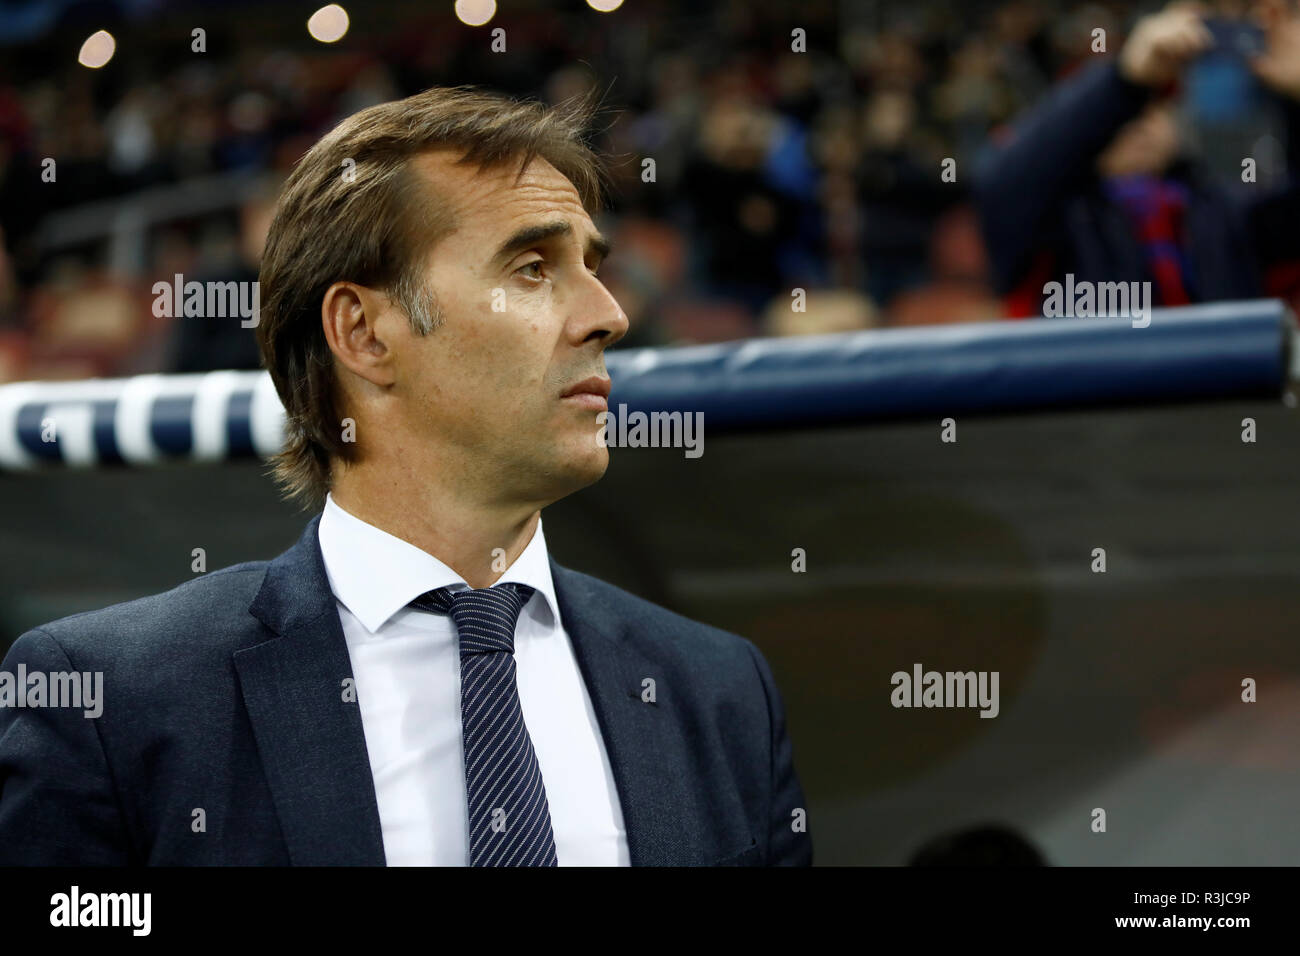 MOSCOW, RUSSIA - OCTOBER 02: Real Madrid head coach Julen Lopetegui look on during the Group G match of the UEFA Champions League between CSKA Moscow and Real Madrid at Luzhniki Stadium on October 2, 2018 in Moscow, Russia. (MB Media) Stock Photo